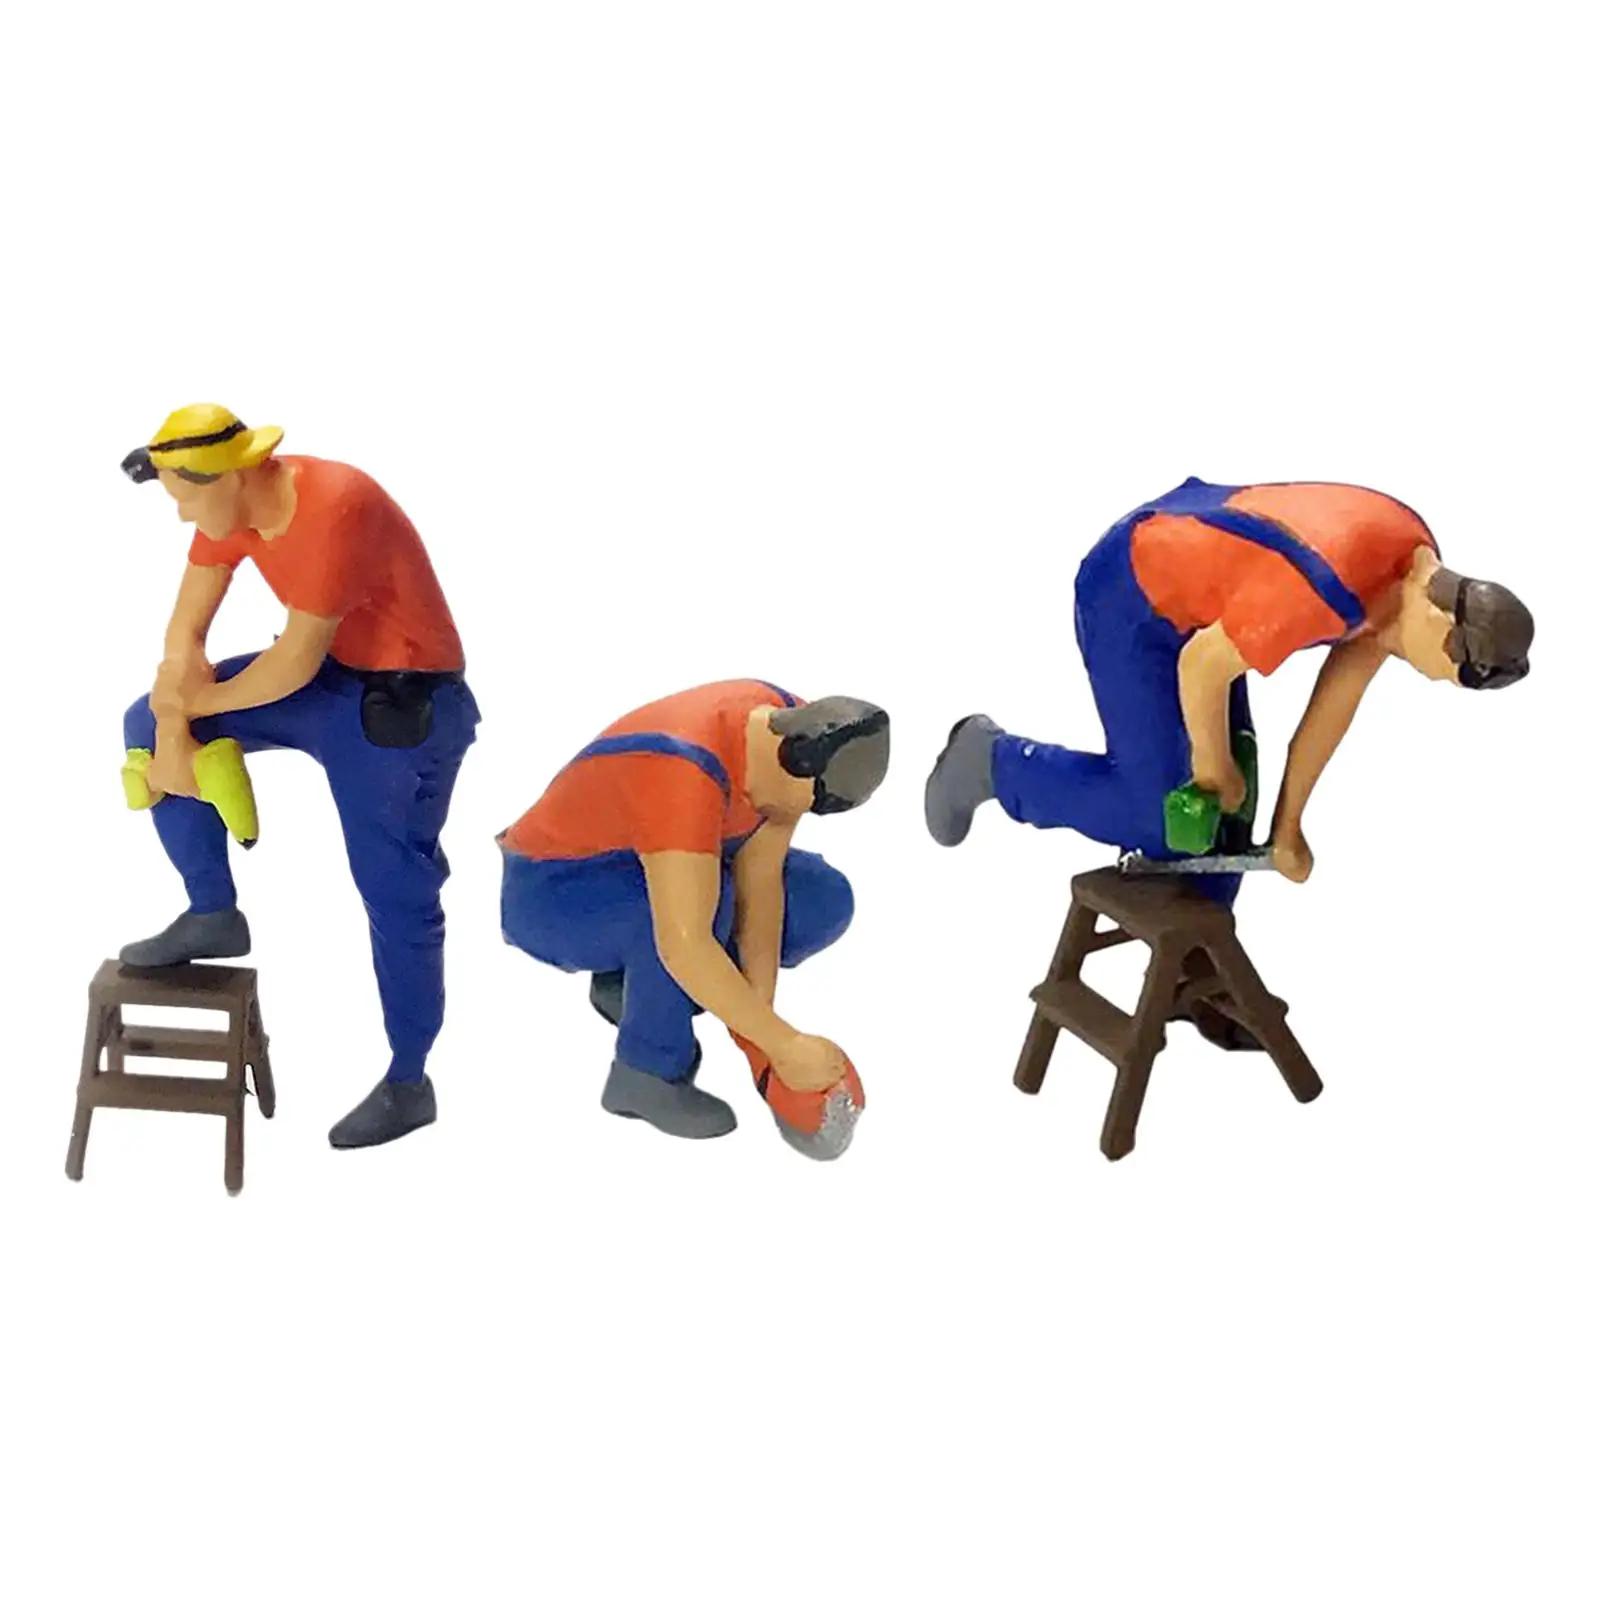 1:87 Scale People Figure Railroad Architectural Building workers Statue